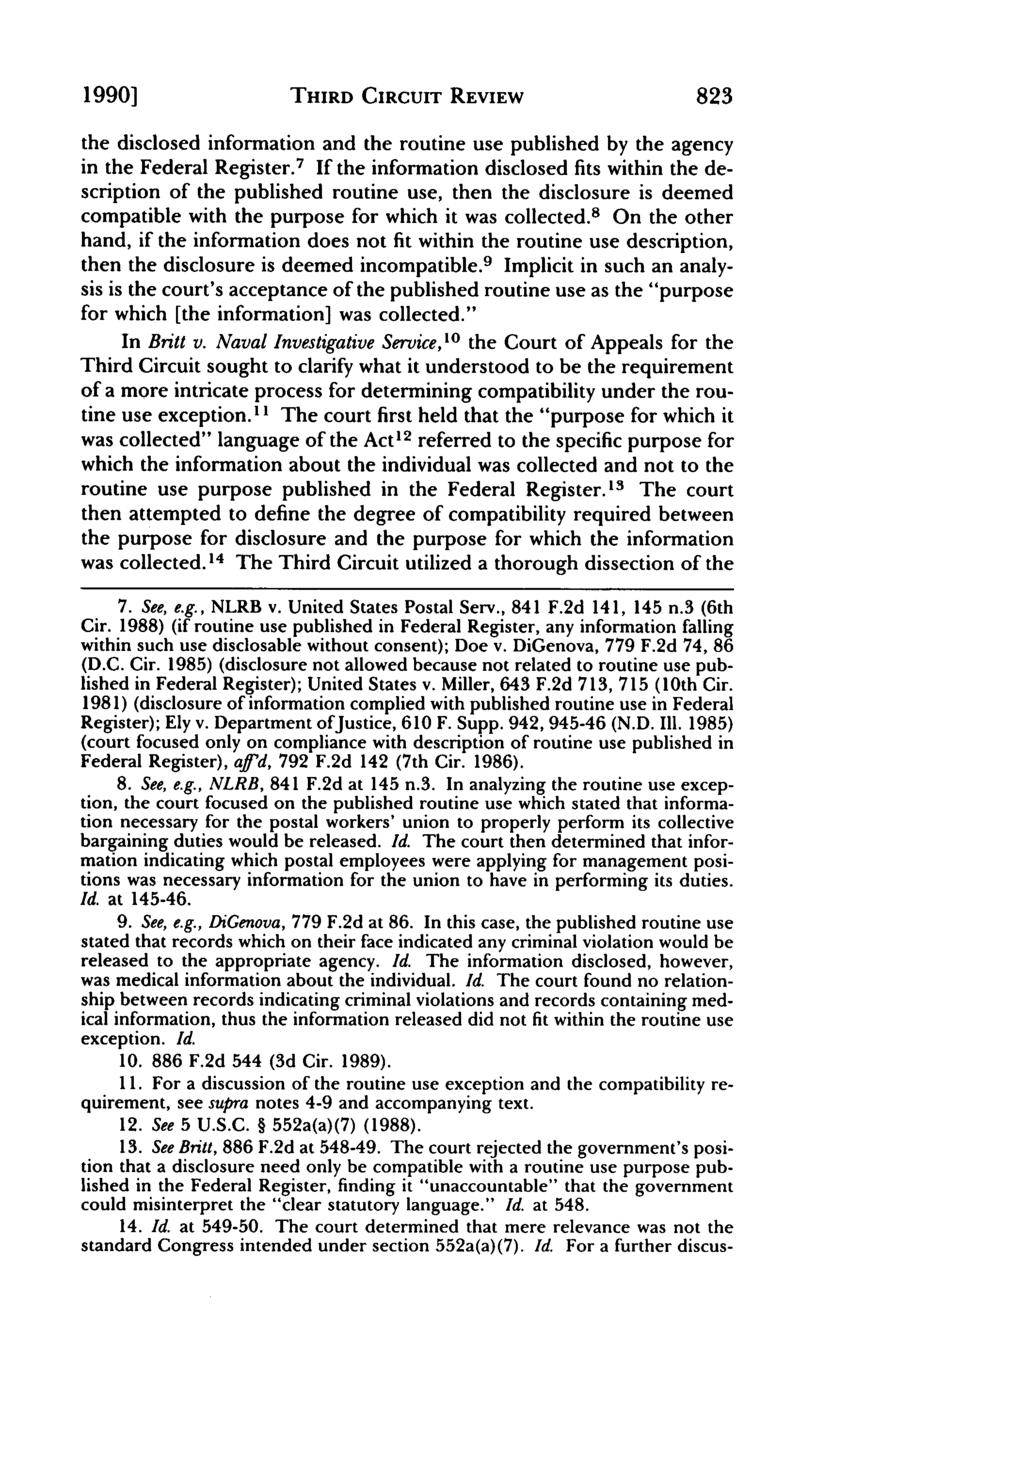 Villanova Law Review, Vol. 35, Iss. 3 [1990], Art. 14 1990] THIRD CIRCUIT REVIEW 823 the disclosed information and the routine use published by the agency in the Federal Register.